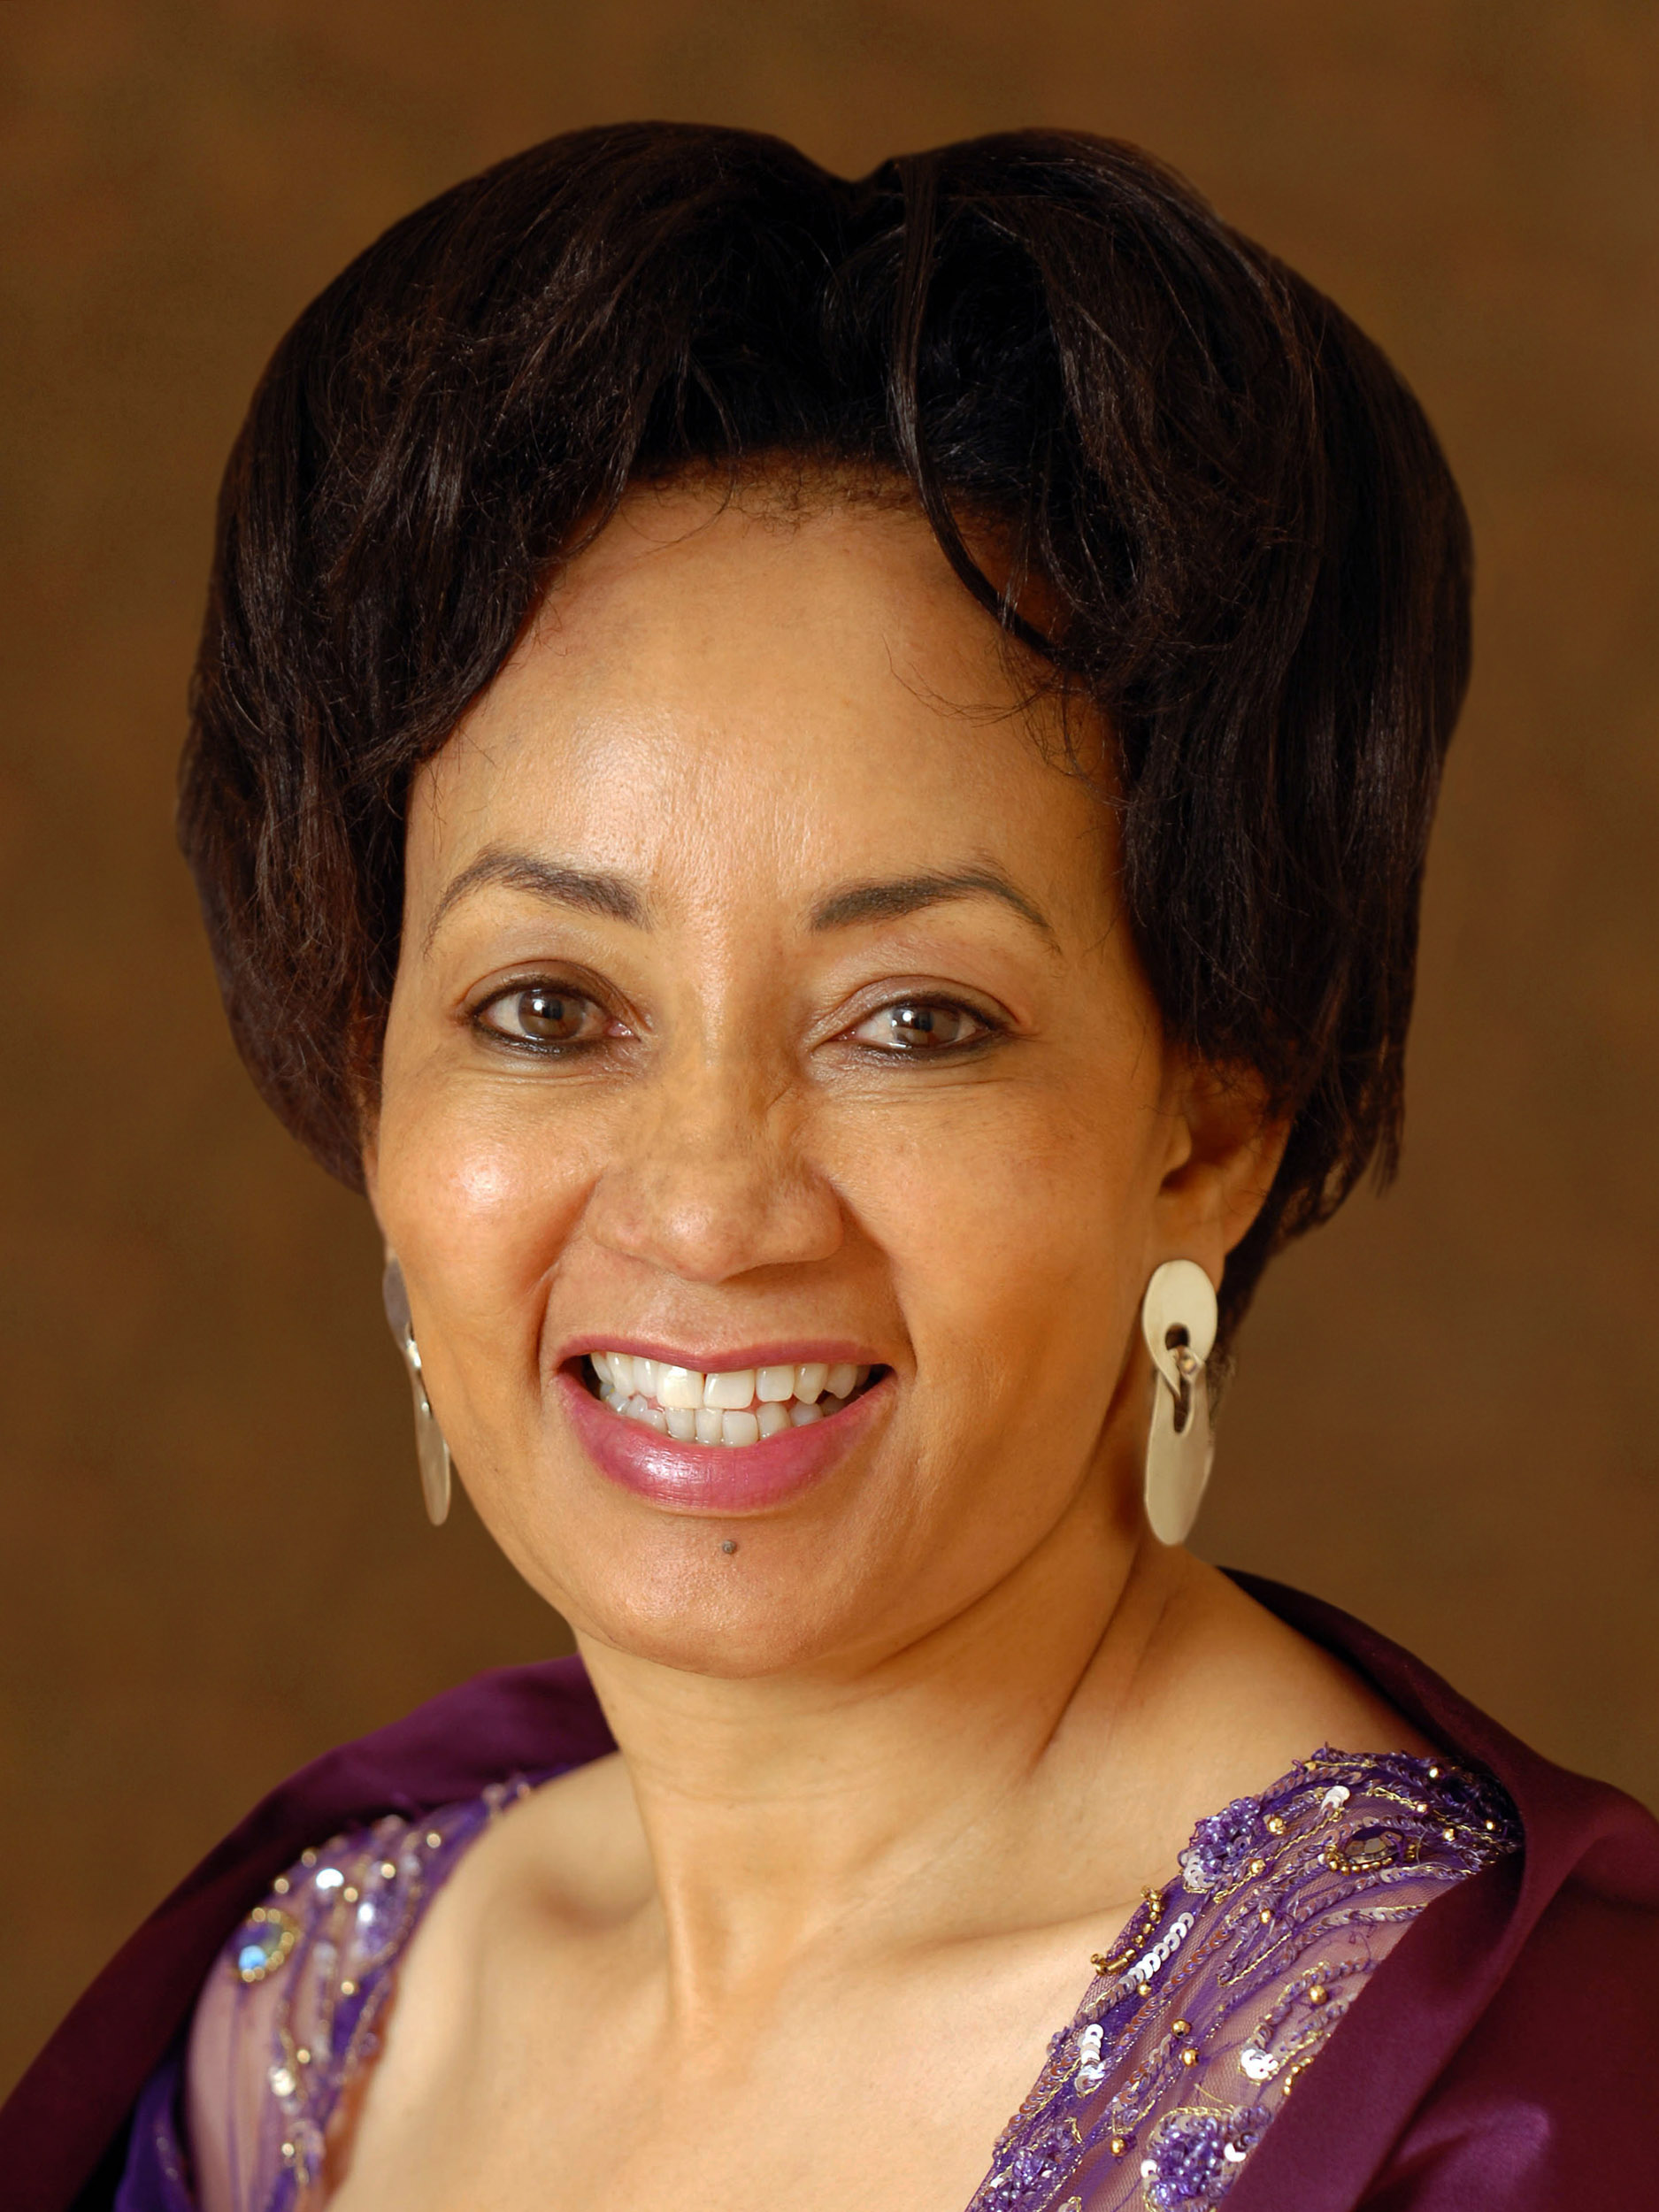 Minister of Tourism Lindiwe Sisulu received Auditor General’s report